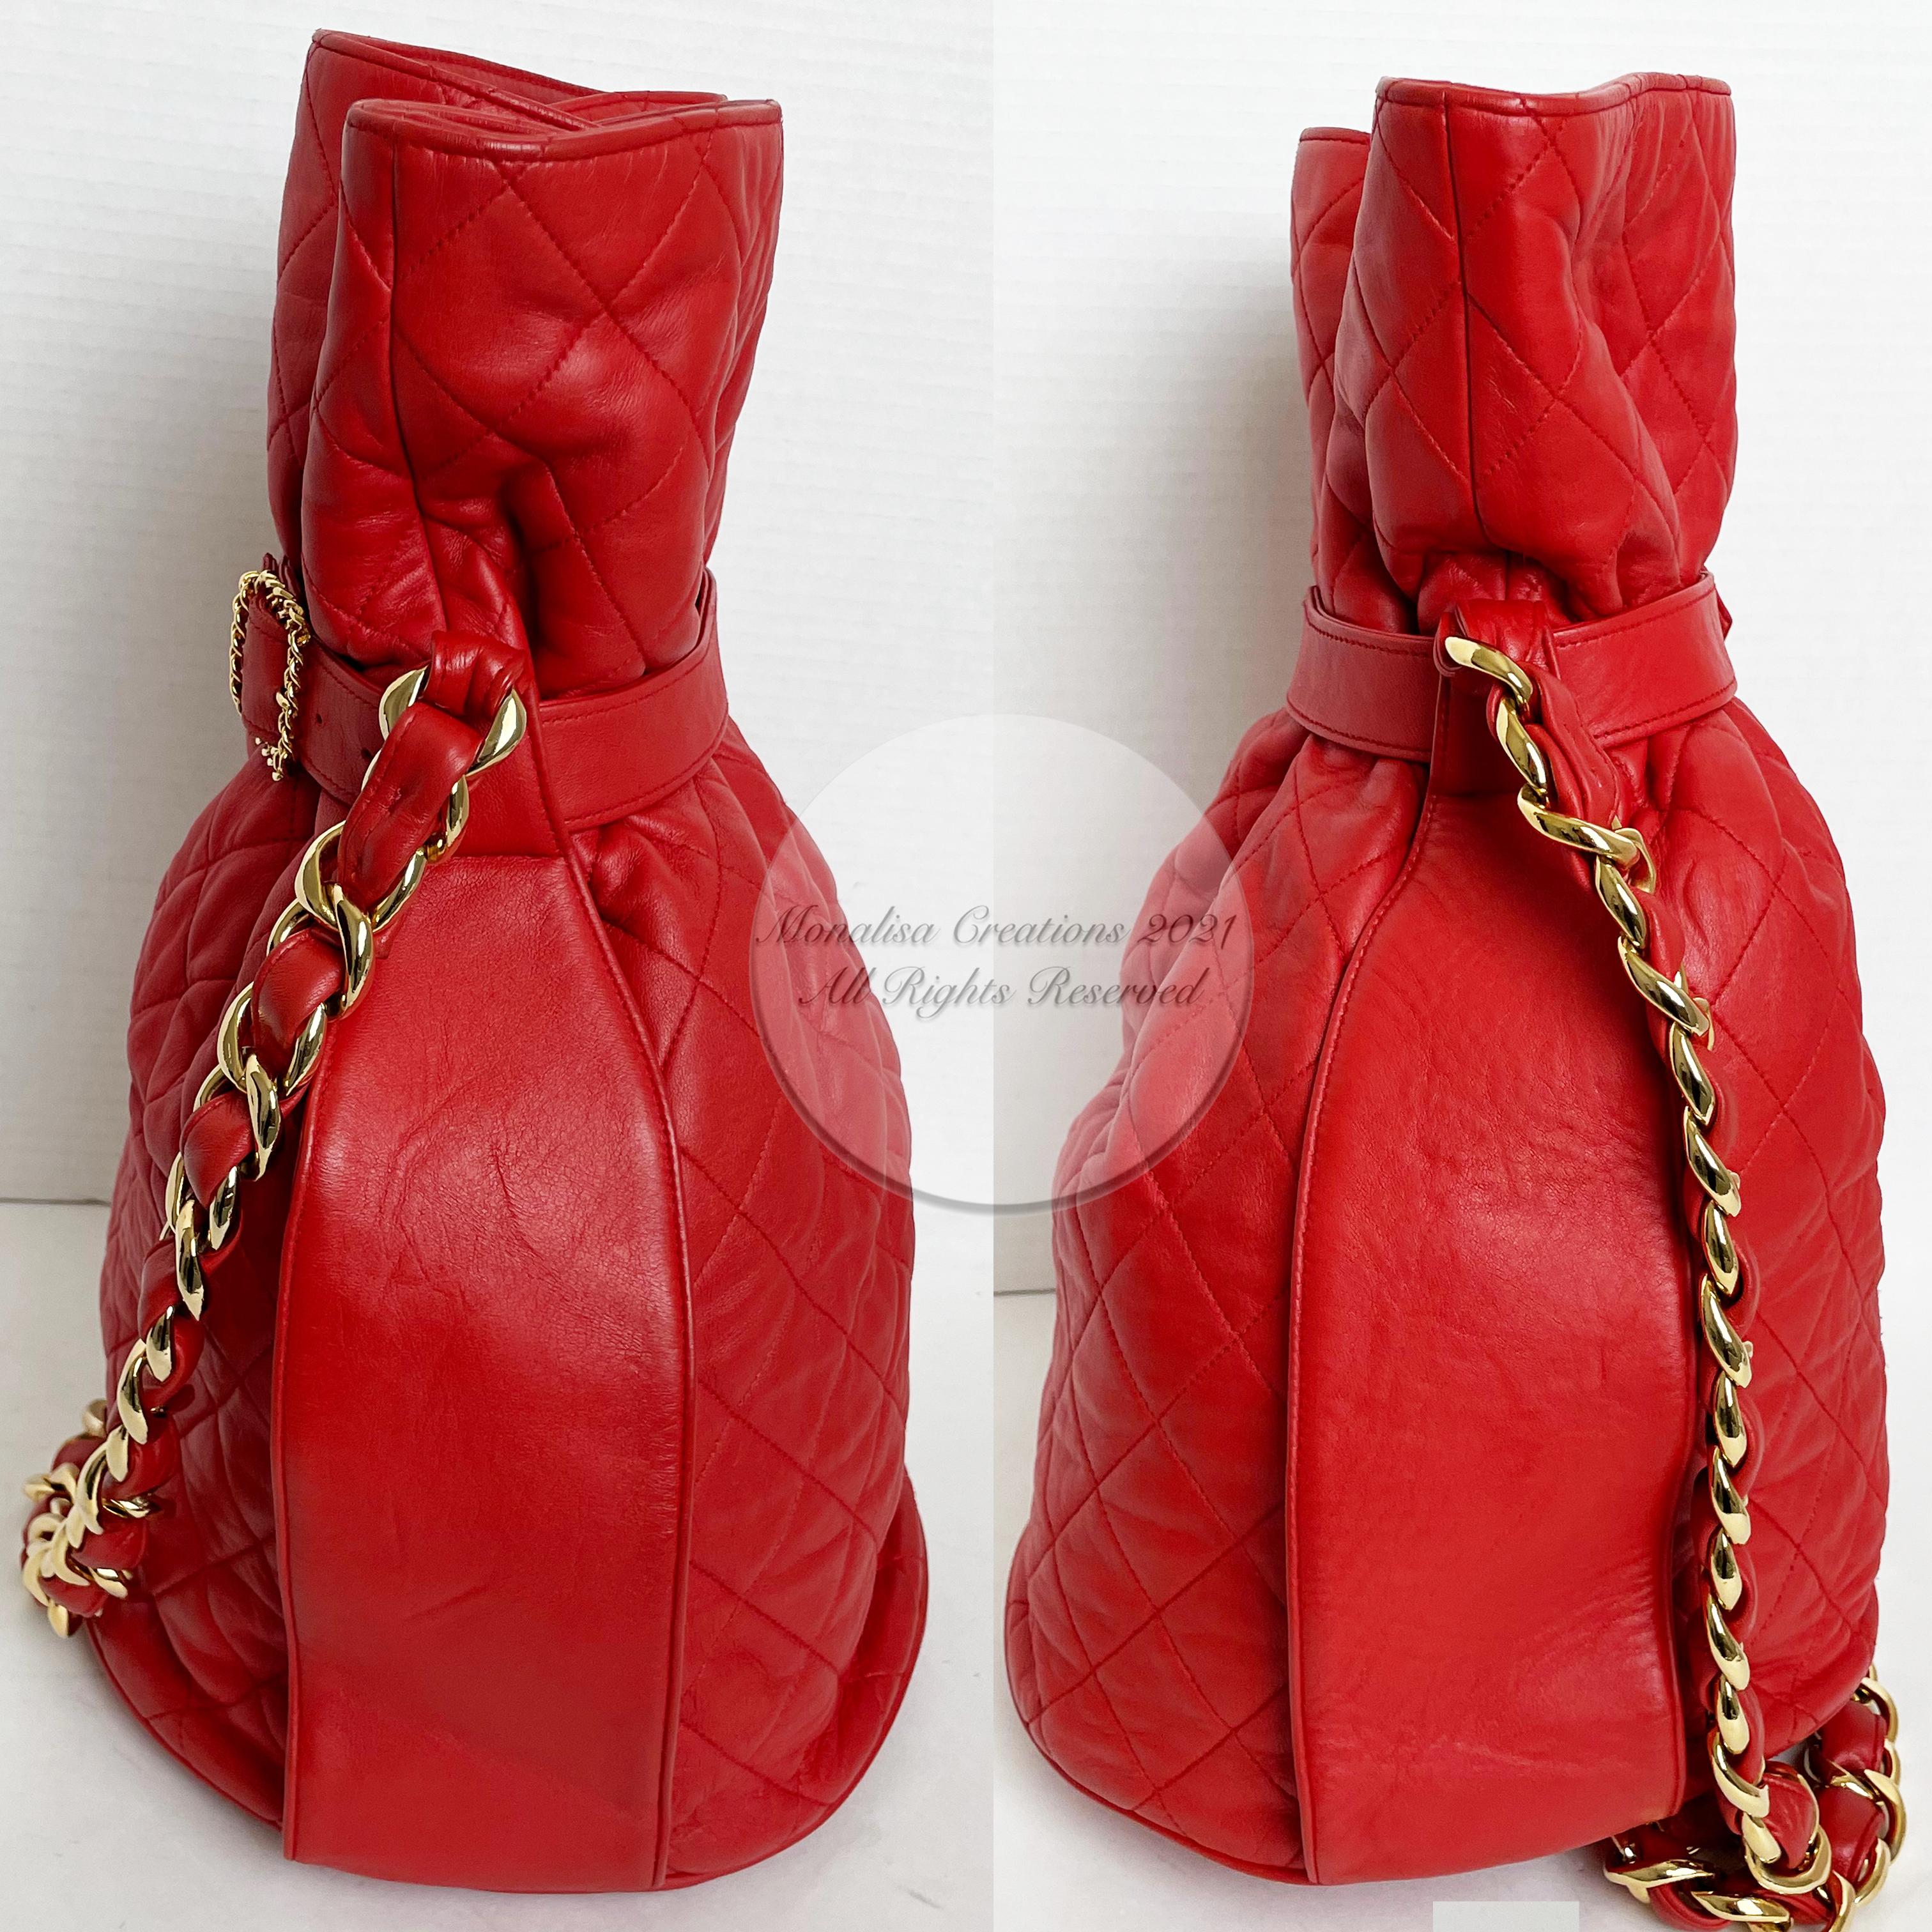 Vintage Chanel Buckle Bag Red Matelasse Leather with Chain Strap F/W 1992 Rare For Sale 1